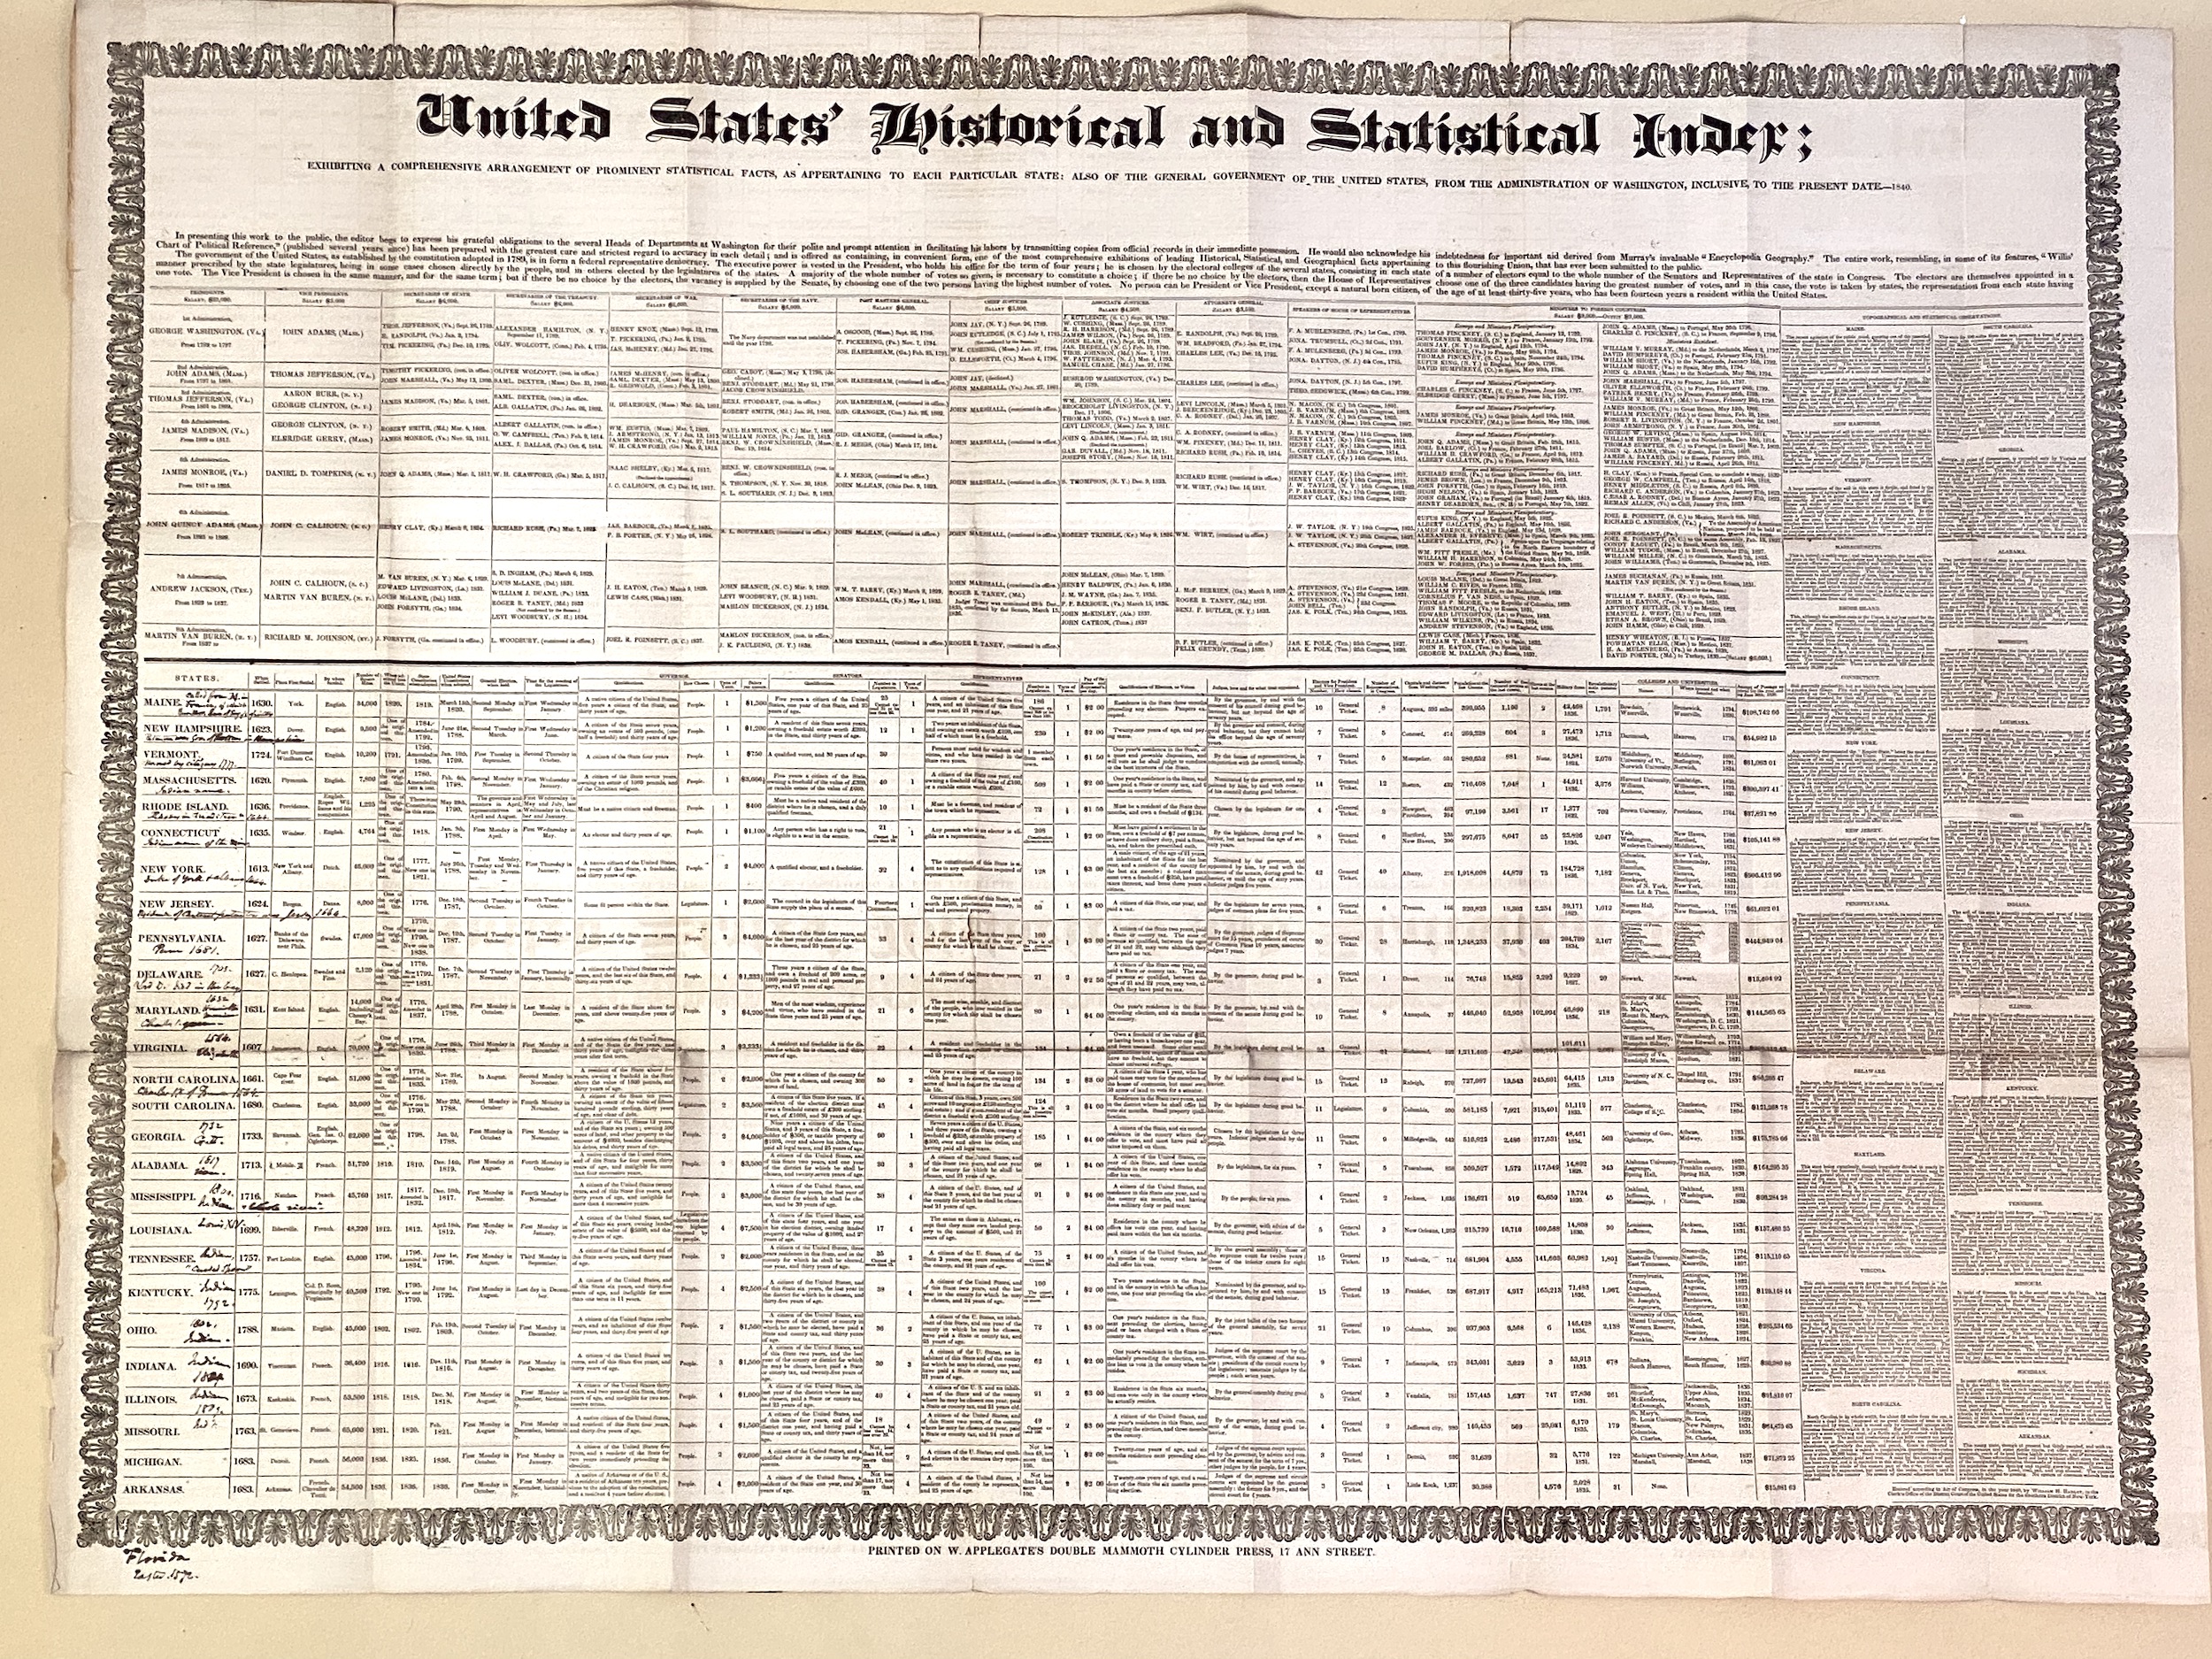 Full chart printed by Applegate, larger poster size